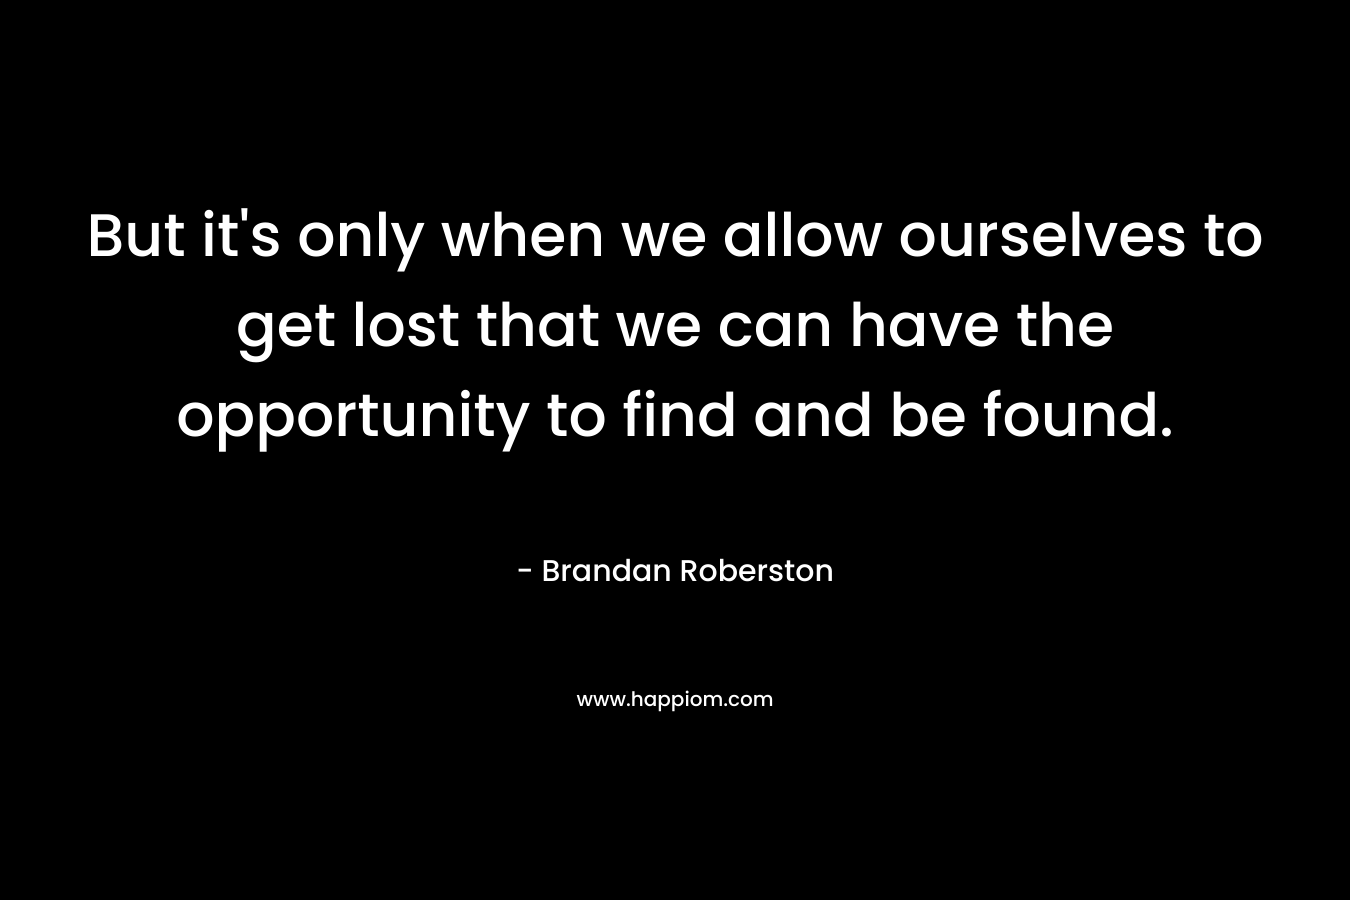 But it’s only when we allow ourselves to get lost that we can have the opportunity to find and be found. – Brandan Roberston